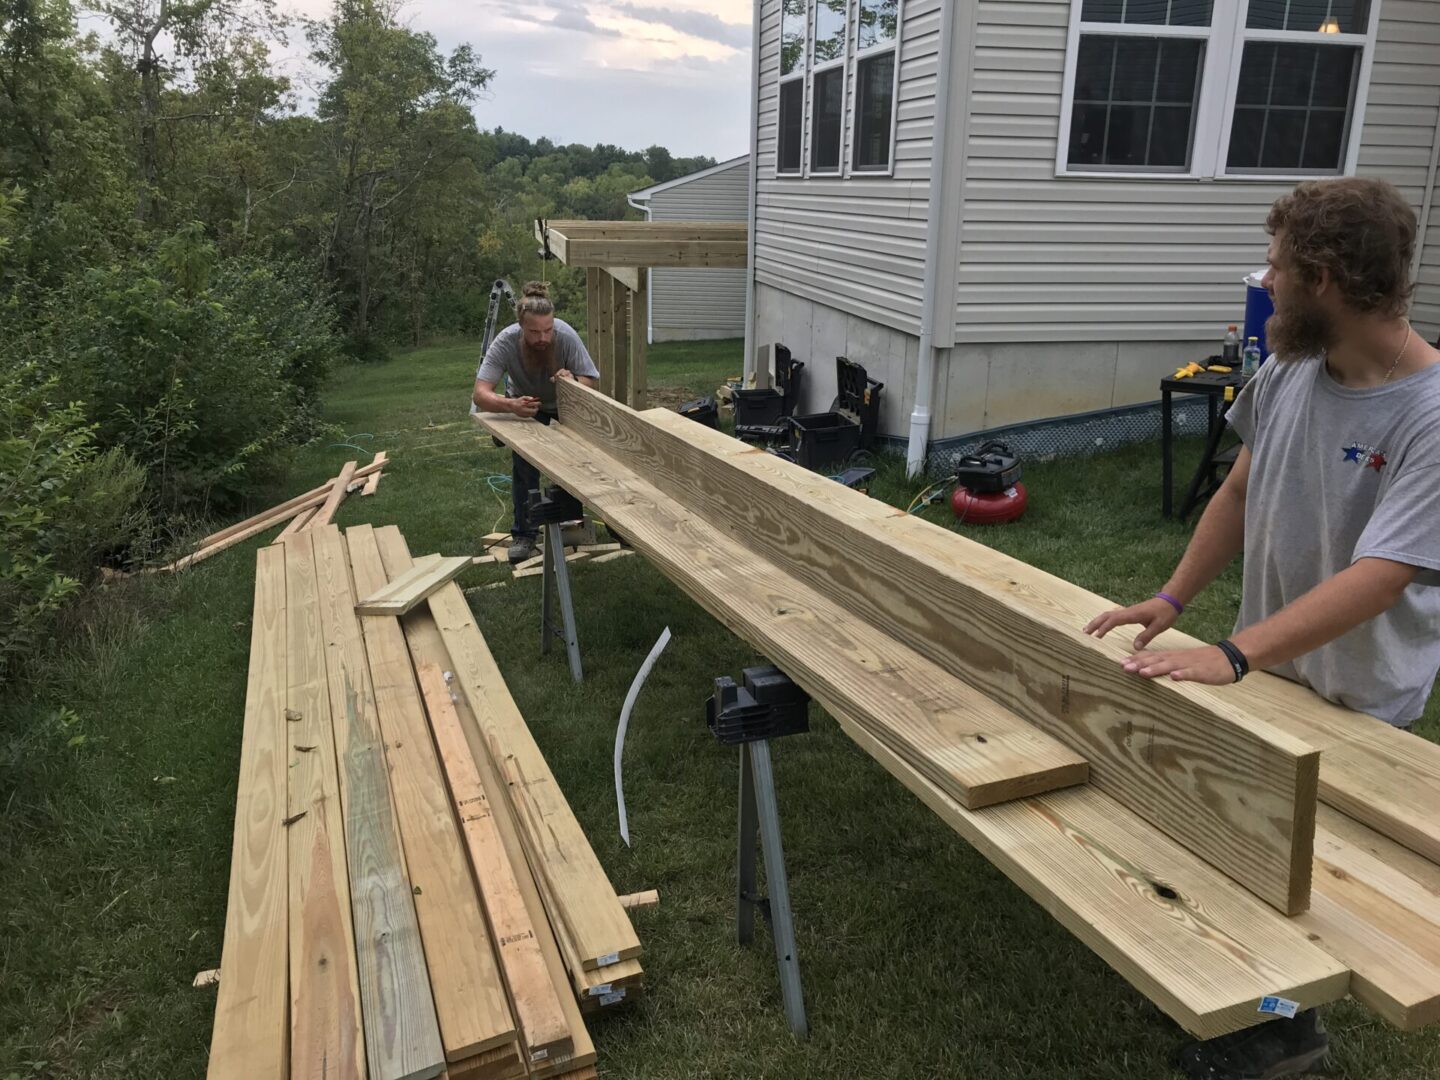 A couple of people that are building some wood